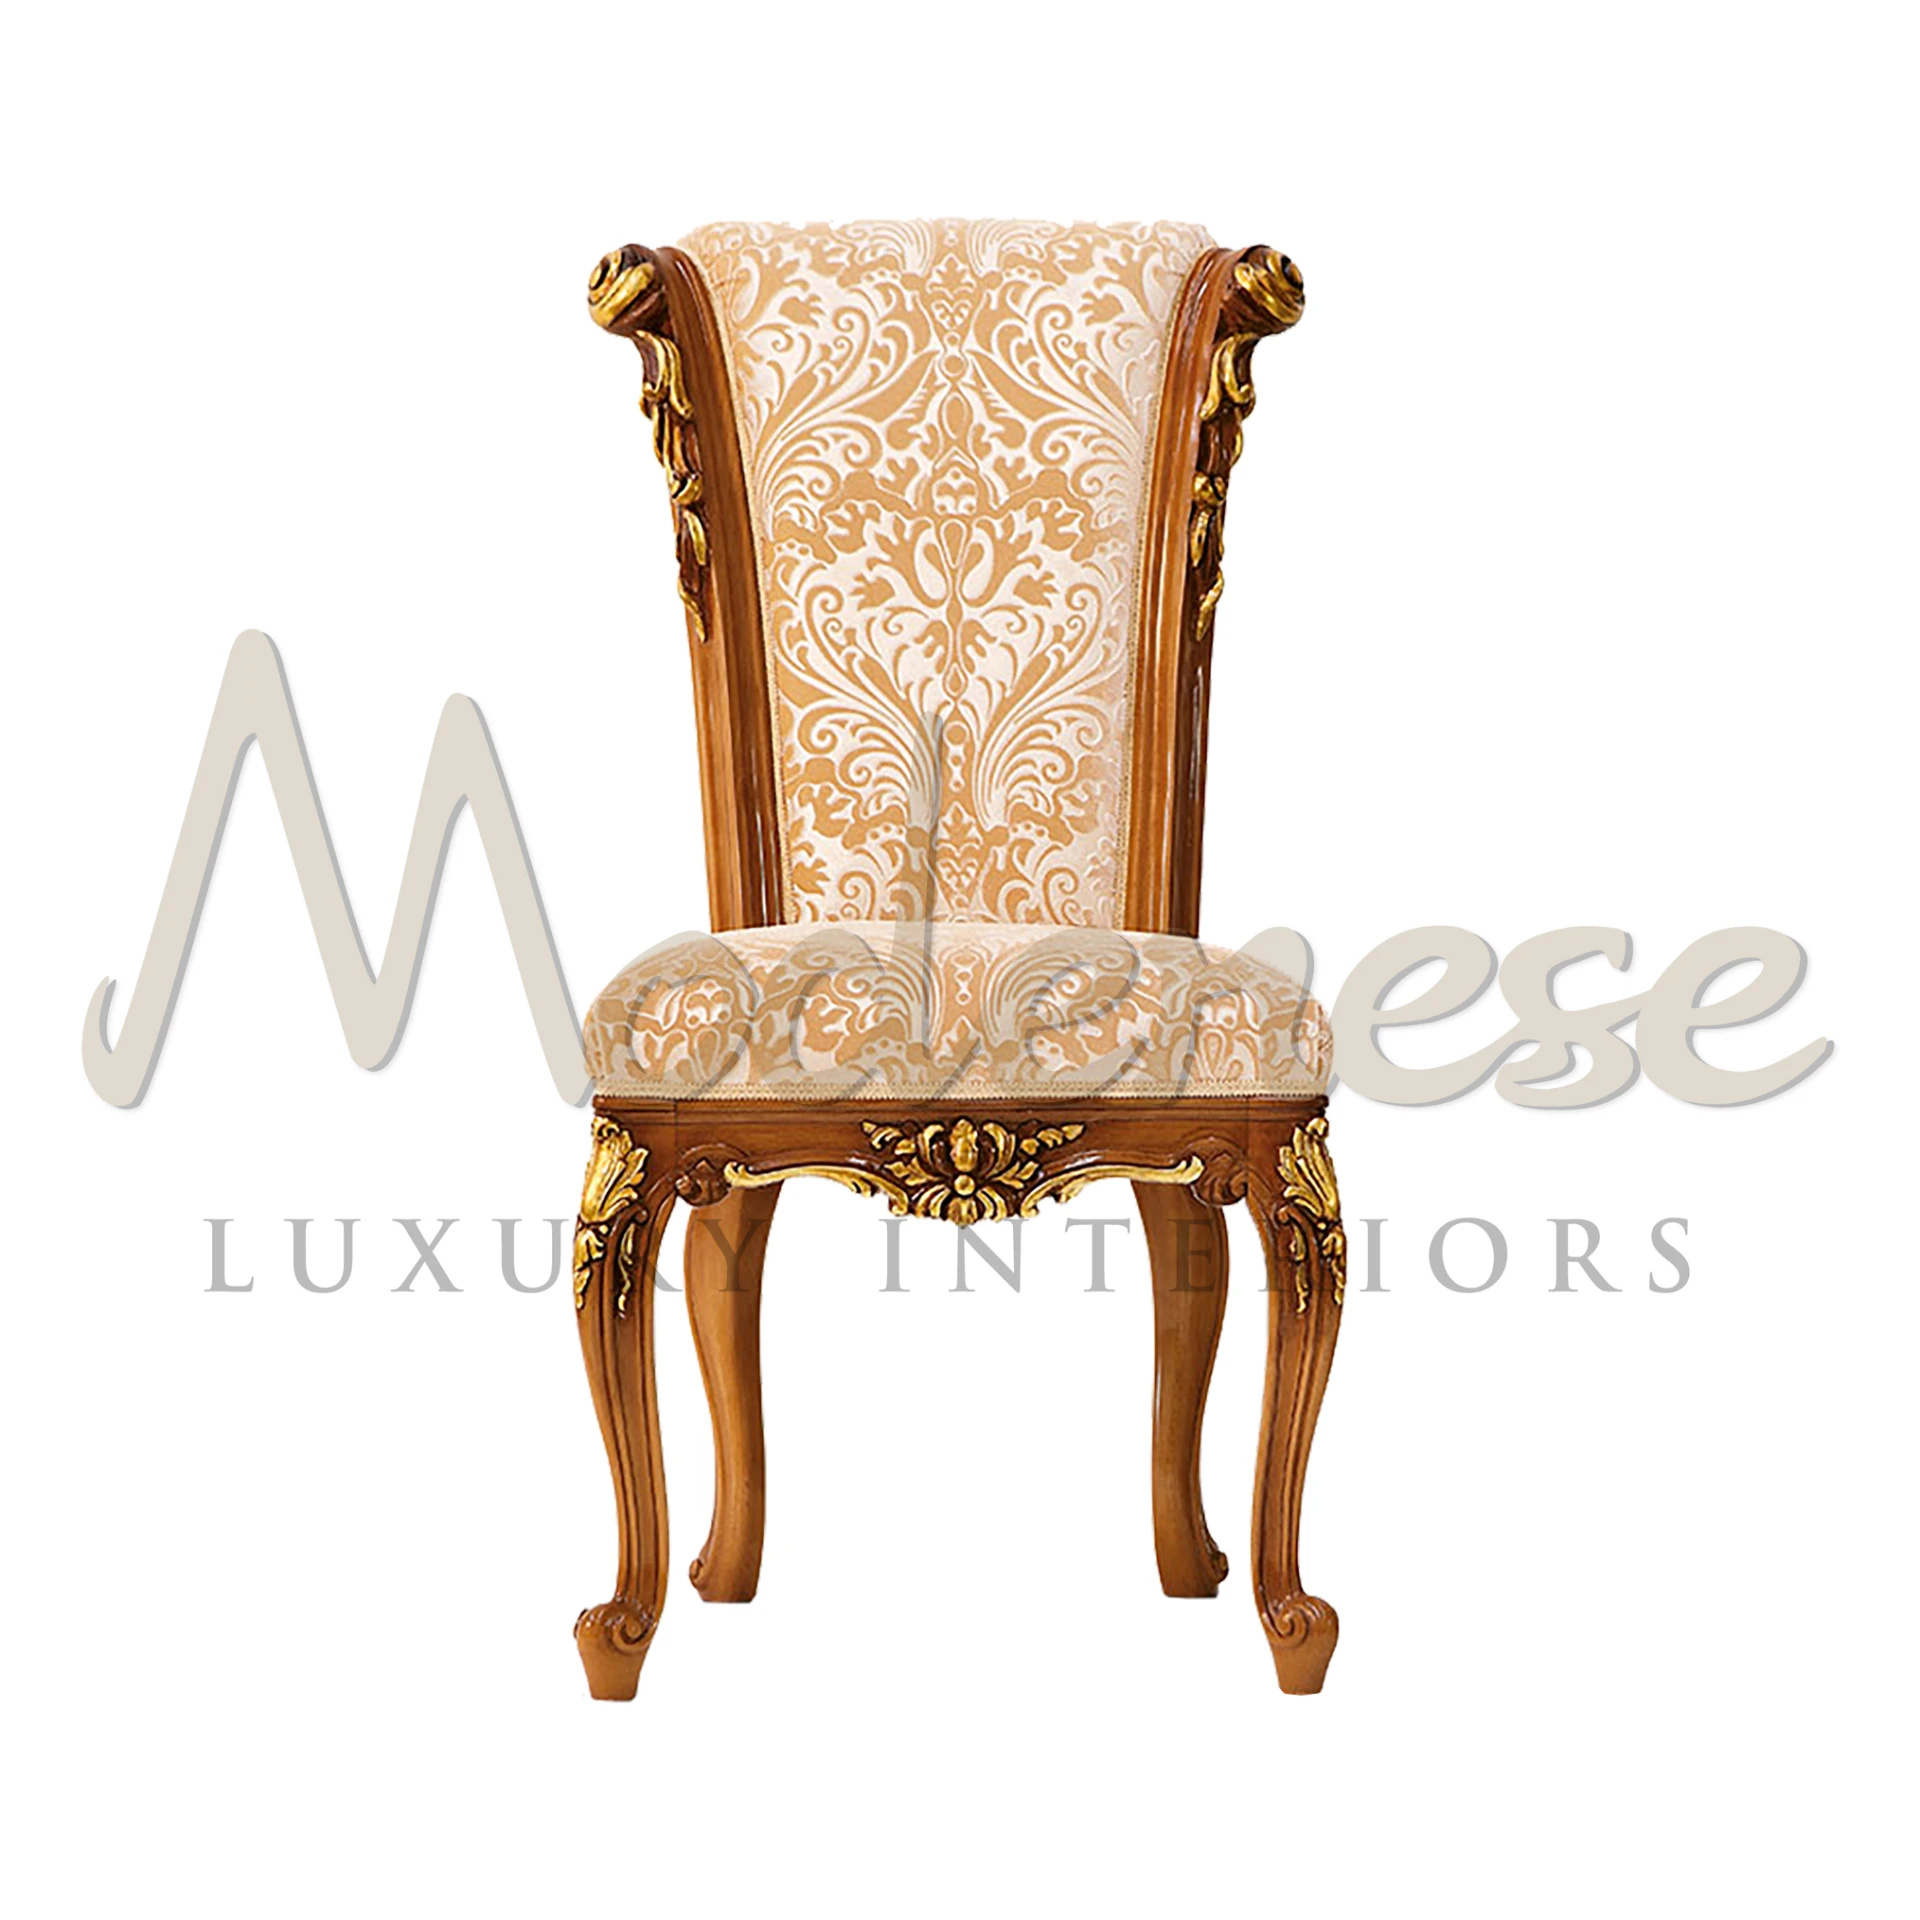 Discover your dining space with Modenese Furniture's handmade chair. Gold leaf details, cherry wood finish, and ivory velvet seat for sophistication.